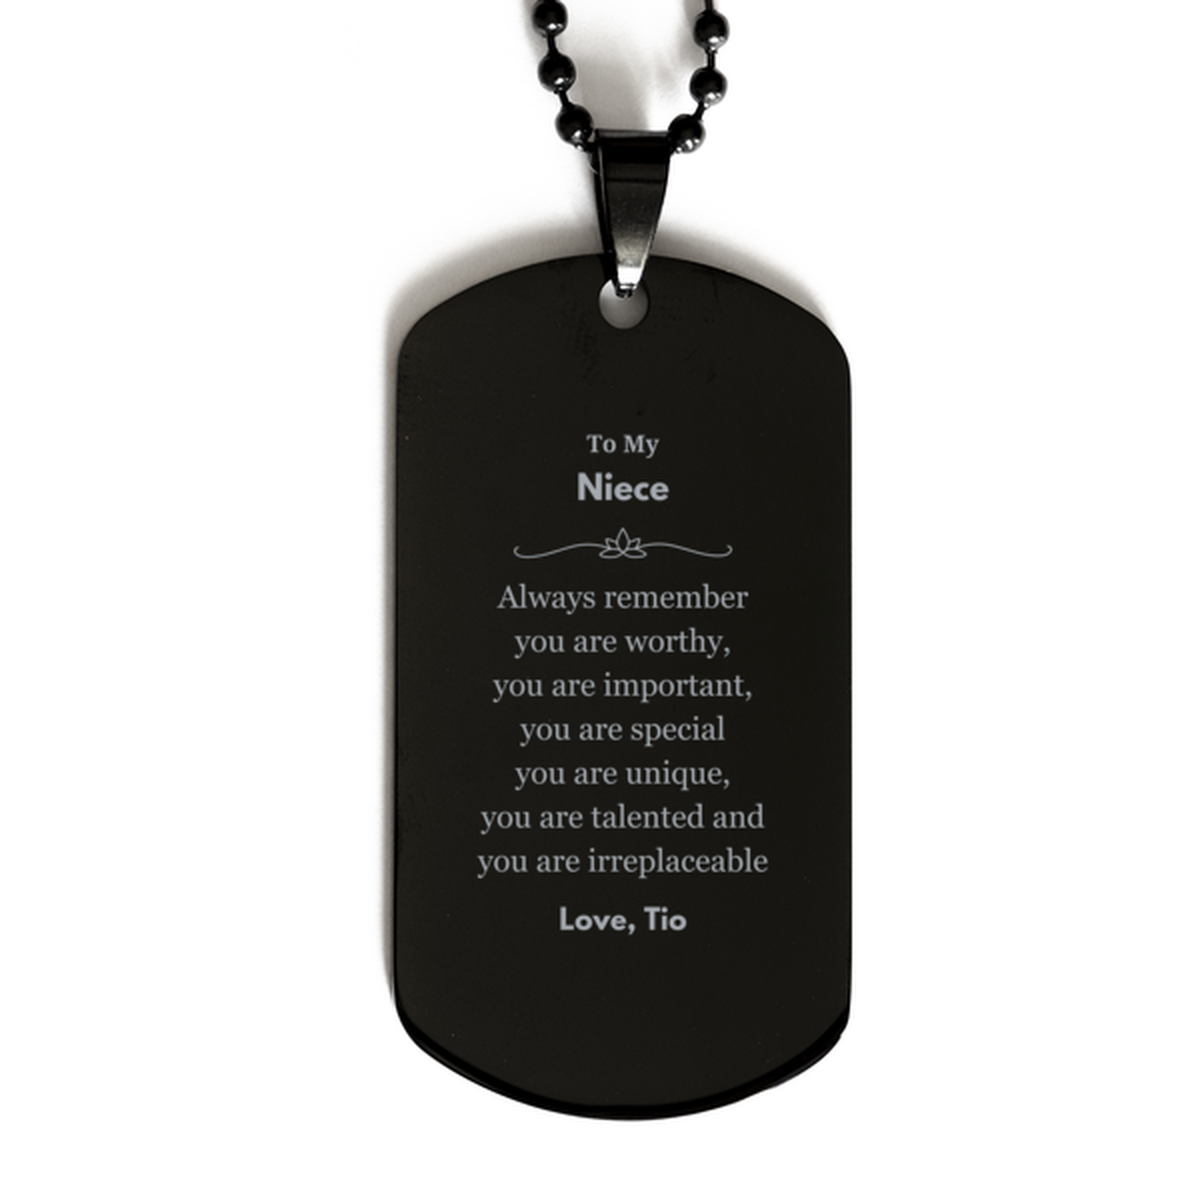 Niece Birthday Gifts from Tio, Inspirational Black Dog Tag for Niece Christmas Graduation Gifts for Niece Always remember you are worthy, you are important. Love, Tio